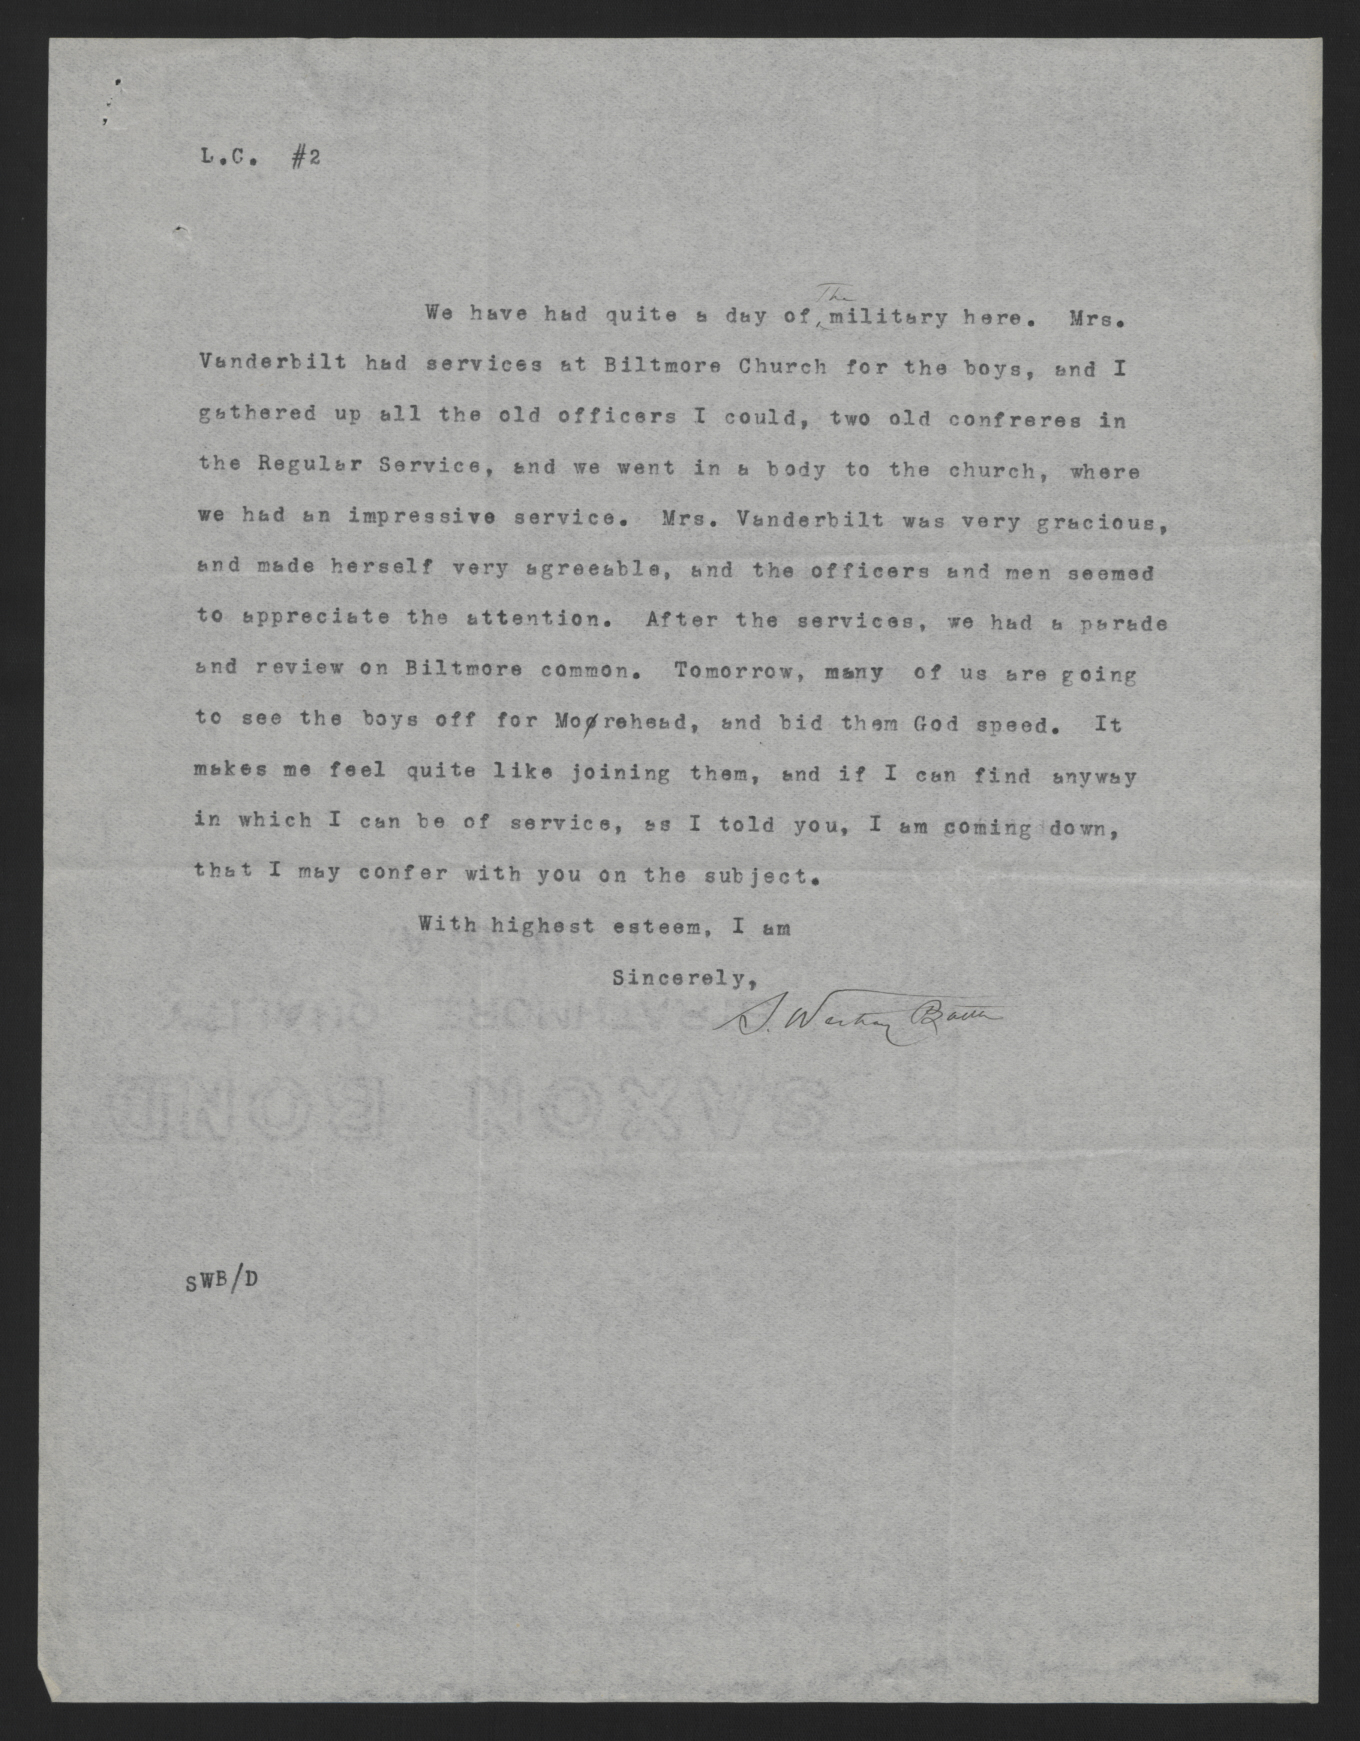 Letter from Battle to Craig, June 23, 1916, page 2